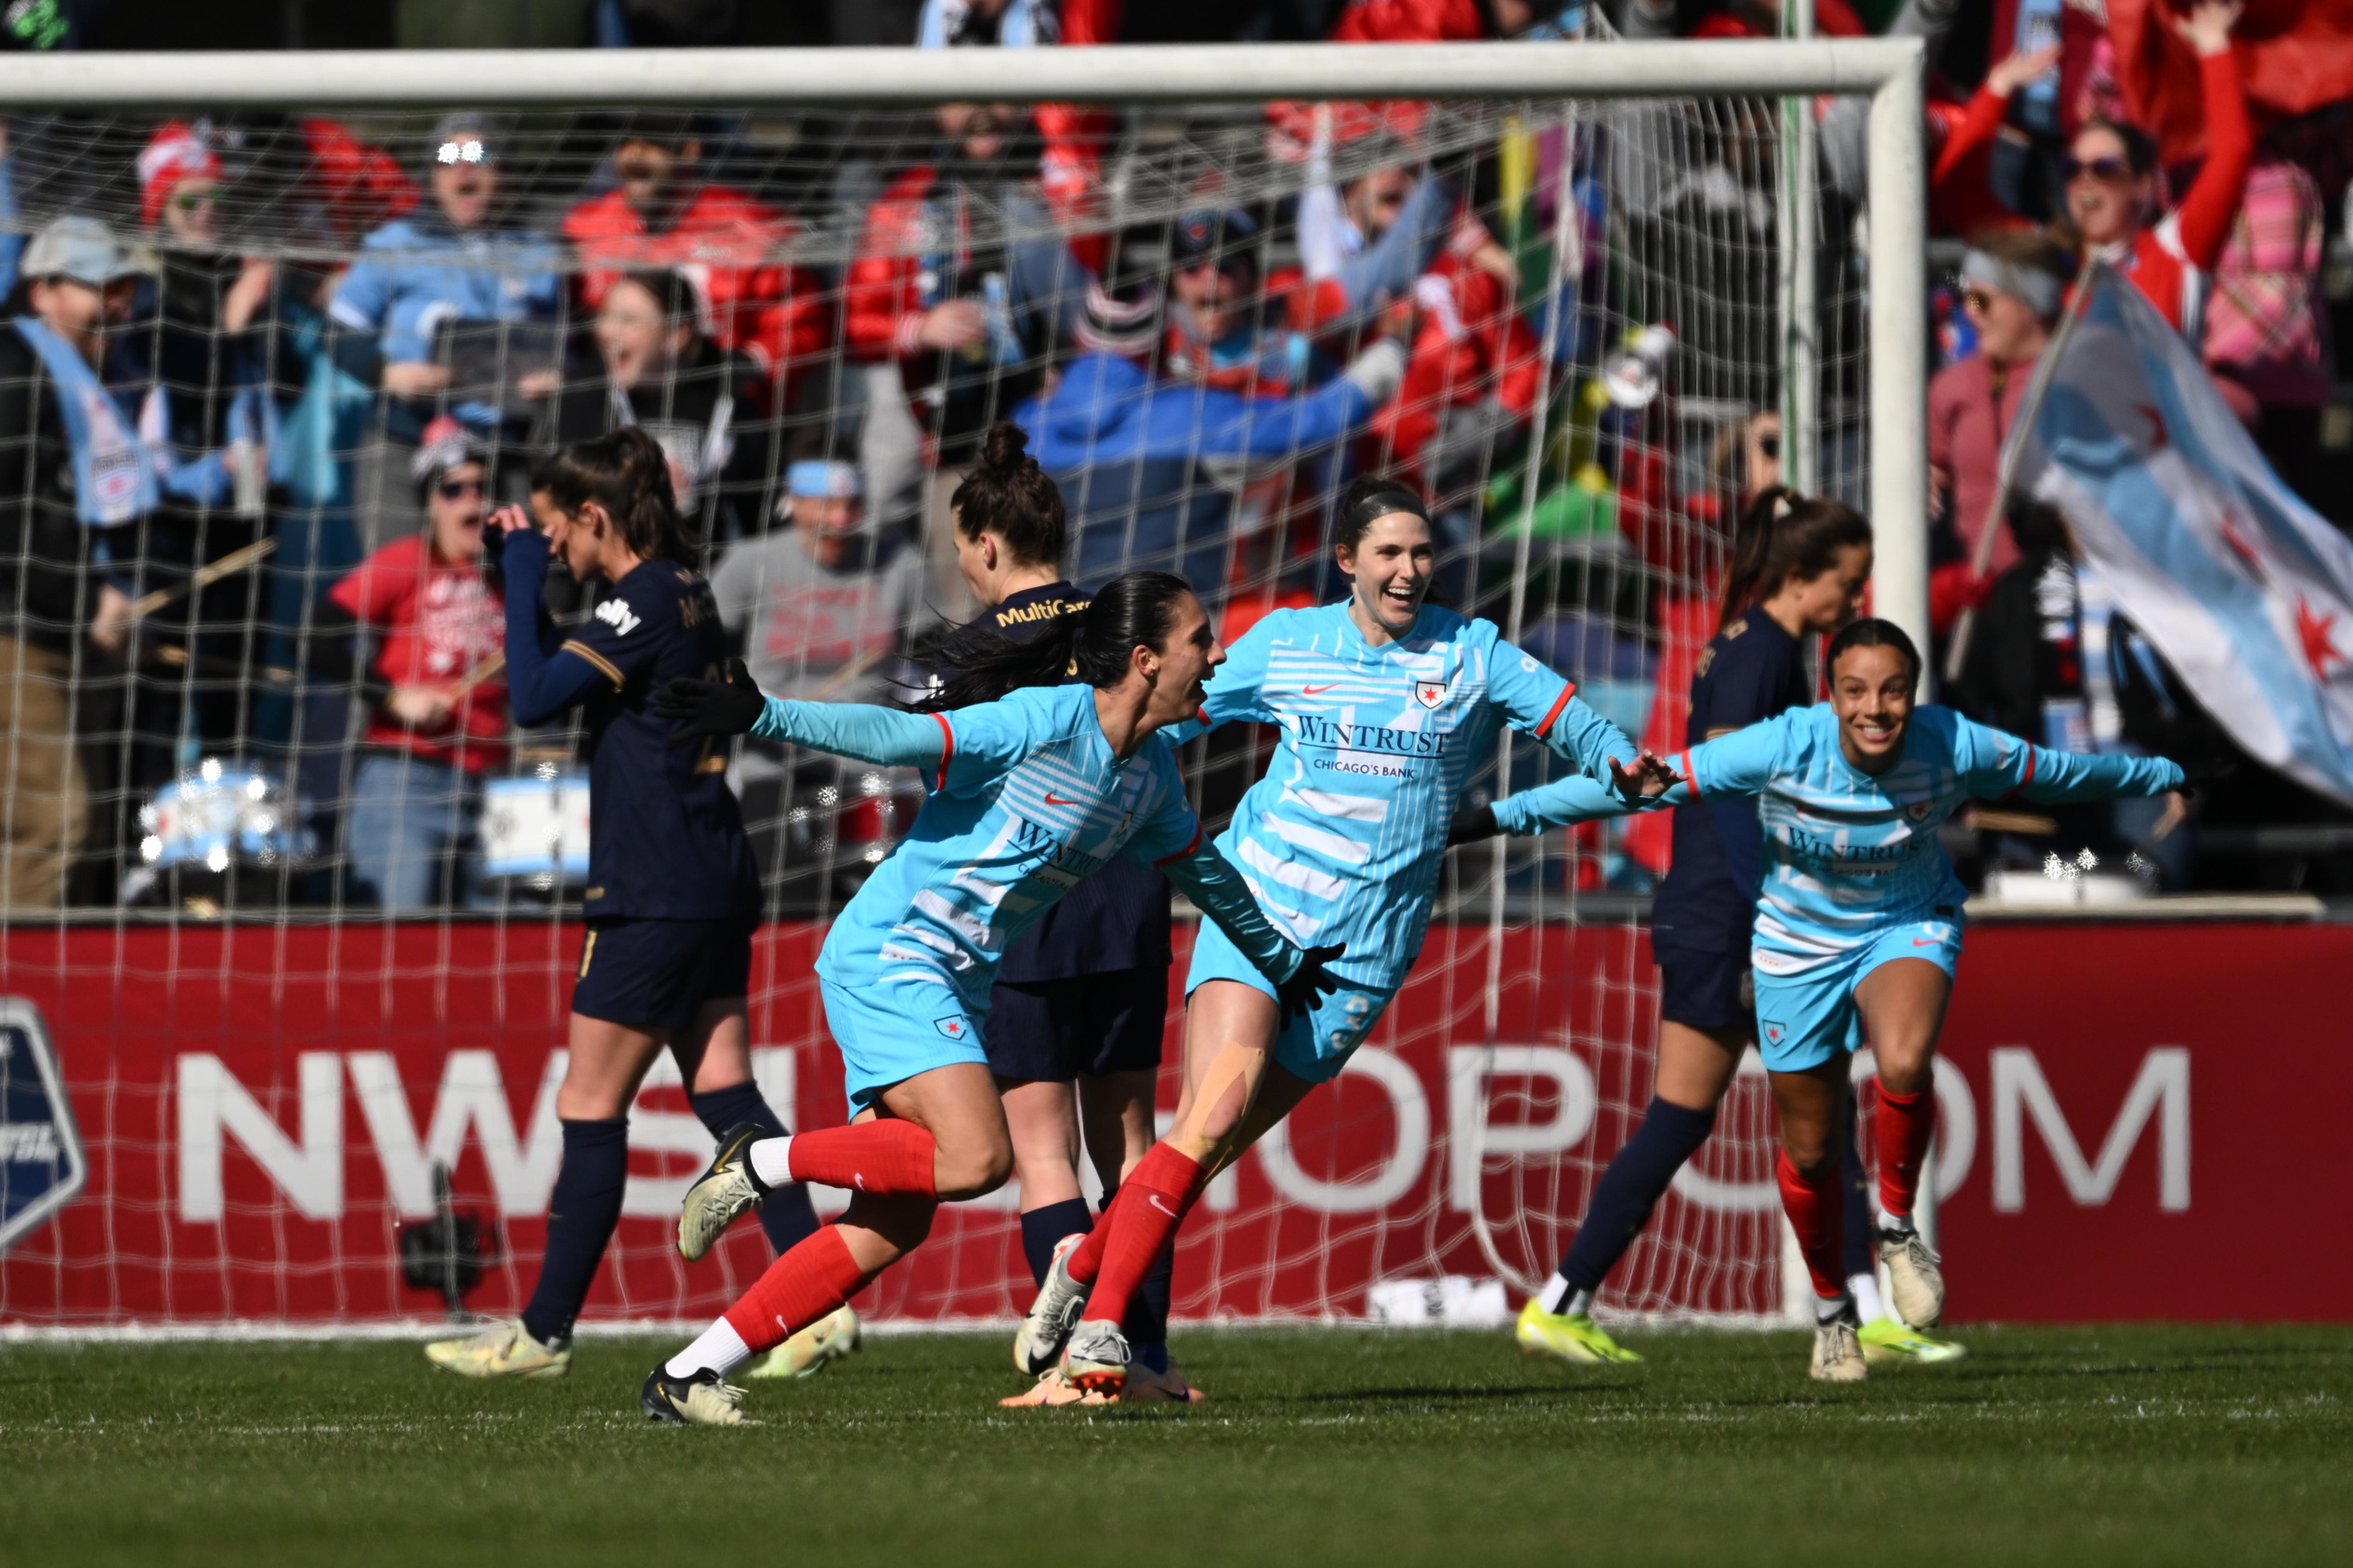 The Chicago Red Stars Celebrates Goal in the Red Stars Home Opener